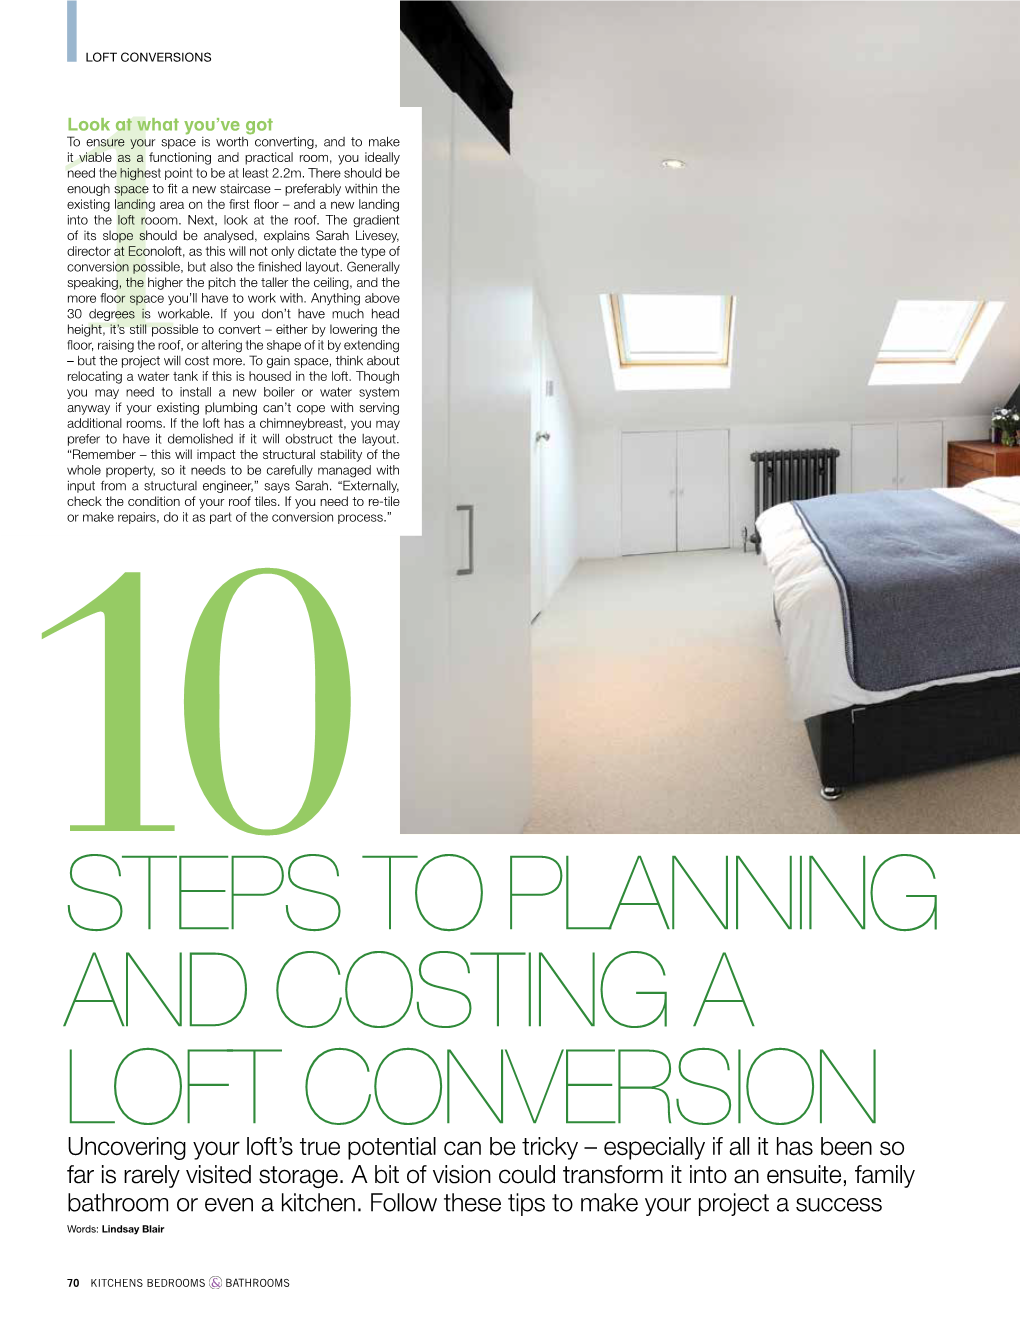 Steps to Planning and Costing a Loft Conversion Uncovering Your Loft’S True Potential Can Be Tricky – Especially If All It Has Been So Far Is Rarely Visited Storage